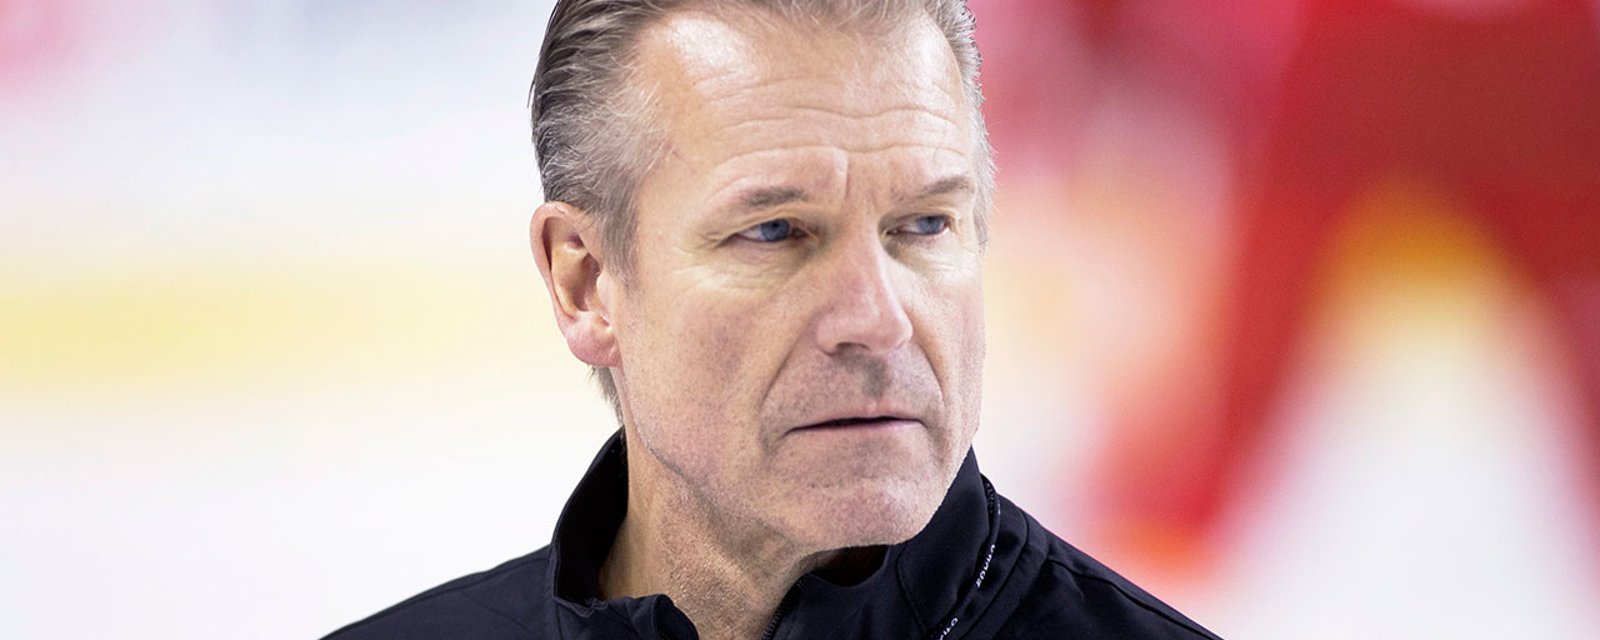 Rumor: Calgary Flames have reportedly picked their next head coach.